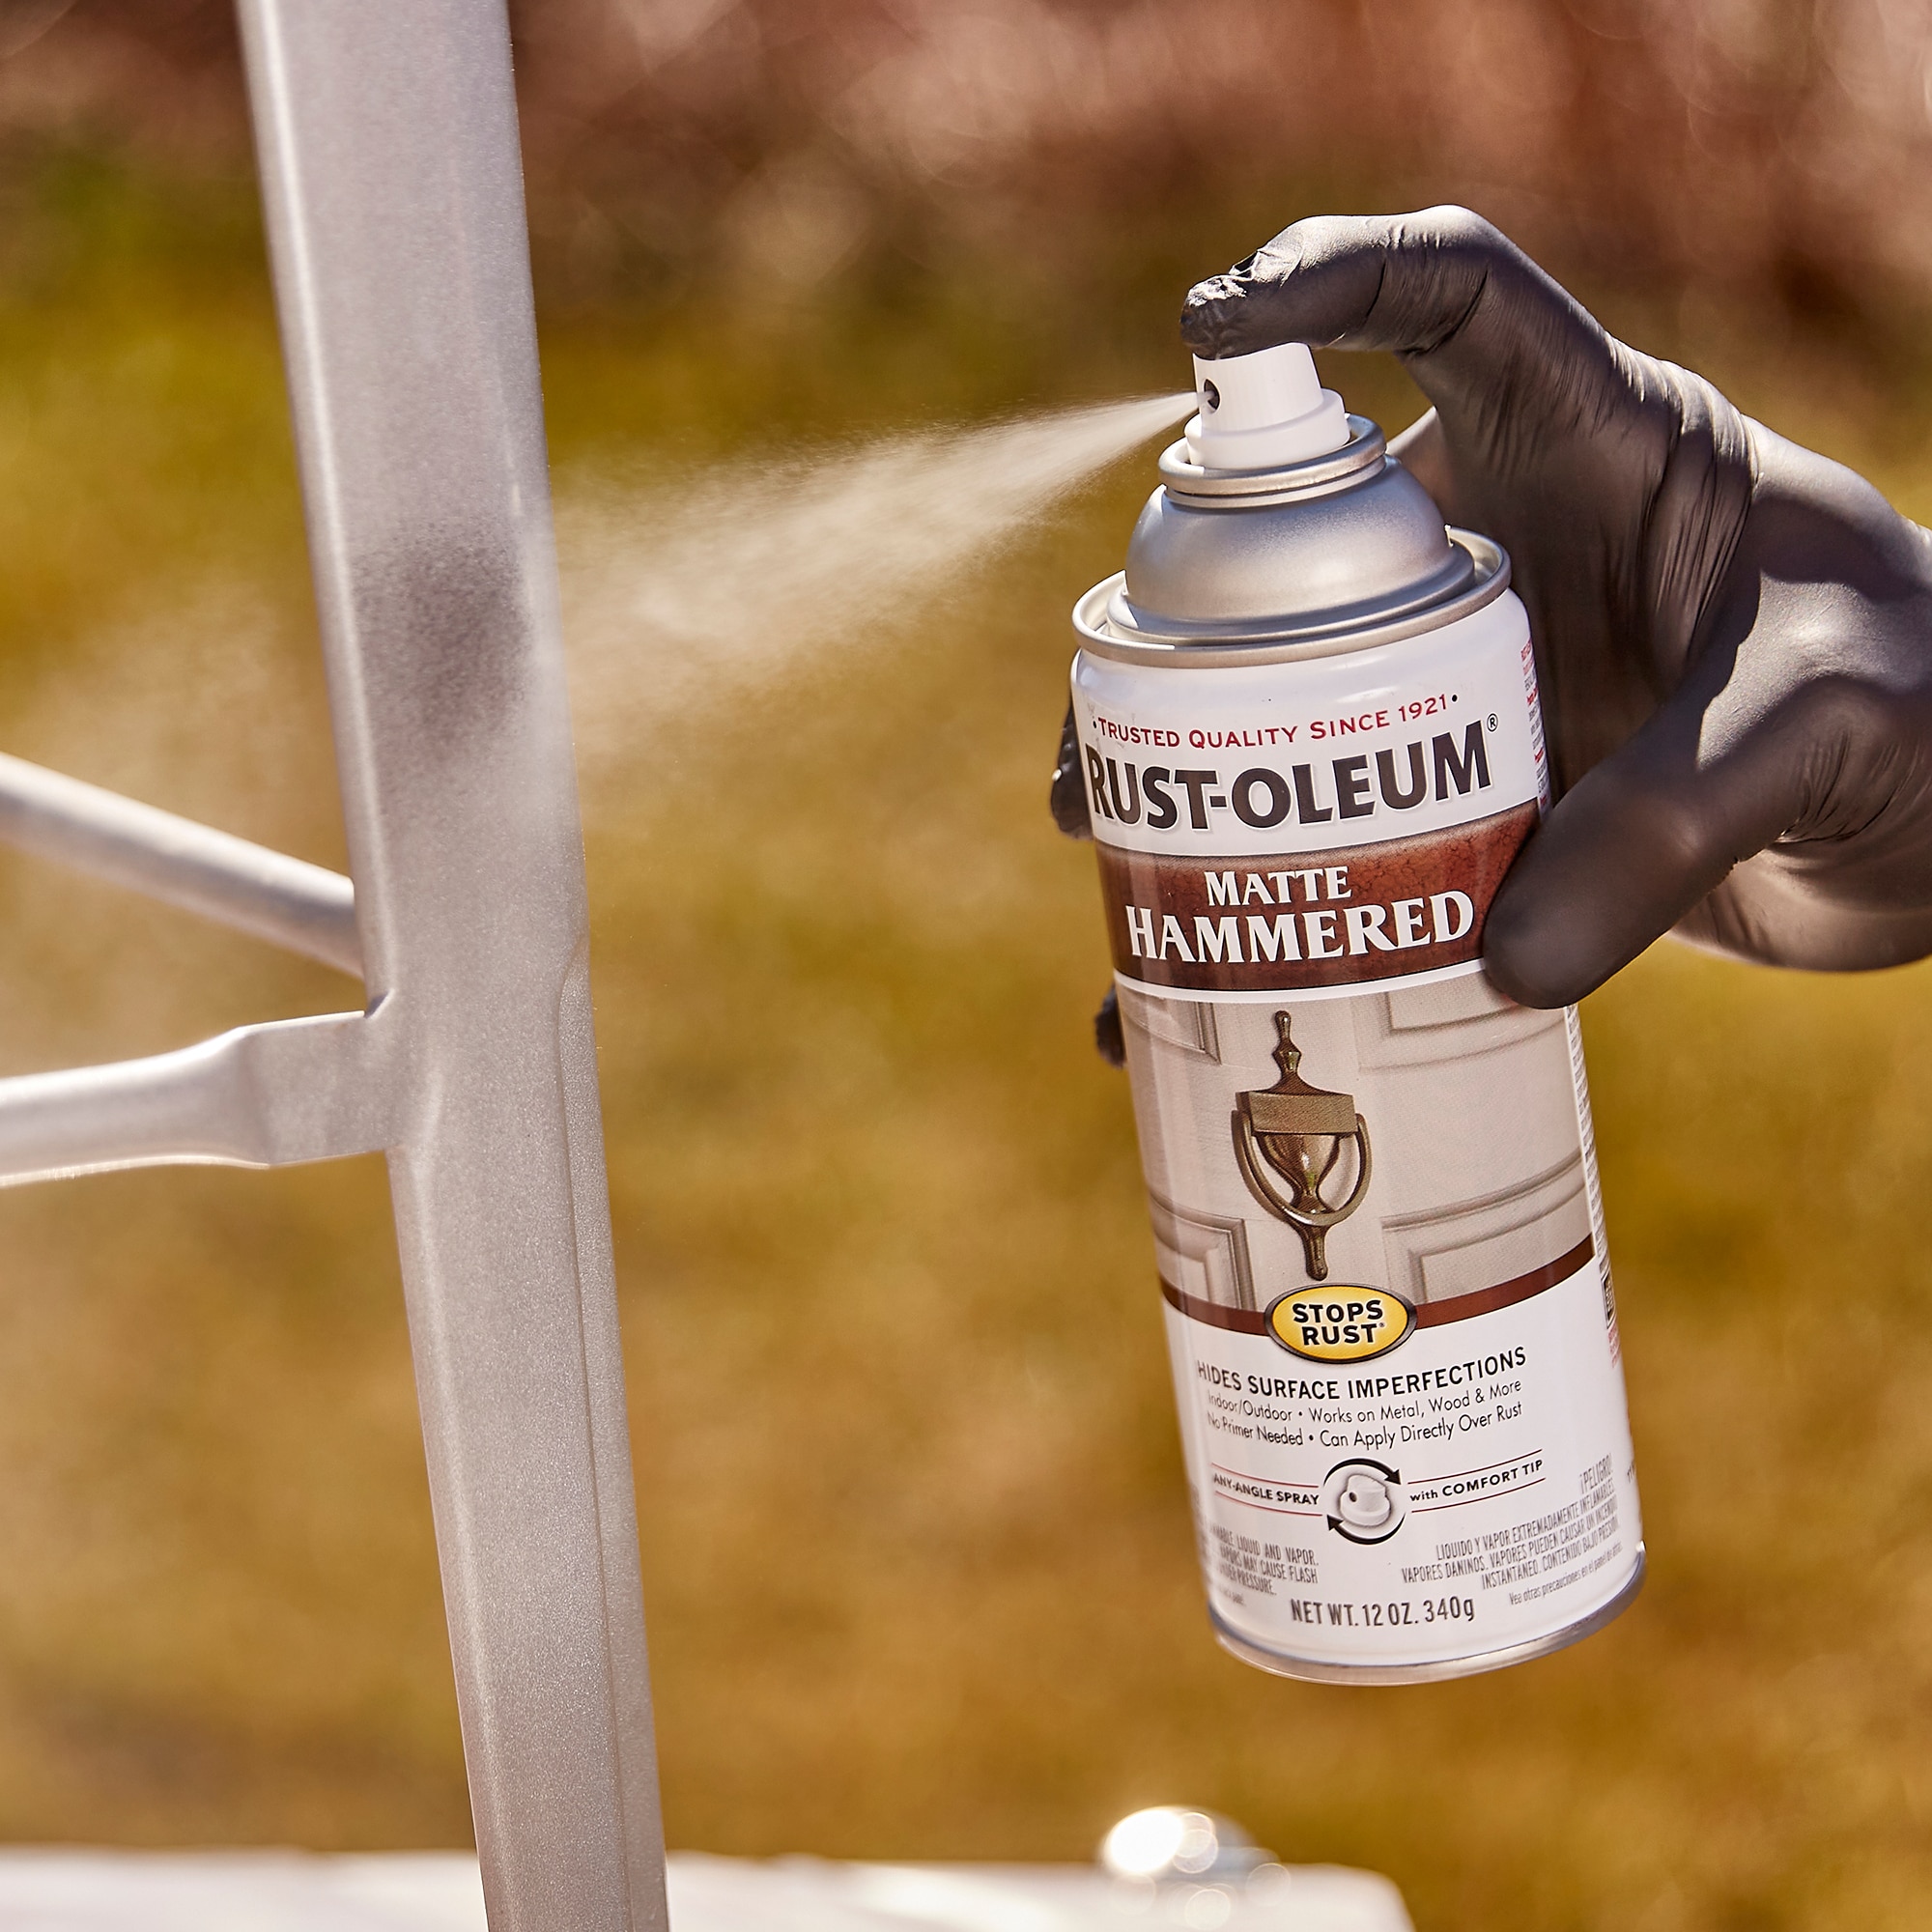 Rust-Oleum Hammered Spray Paint, Black - Midwest Technology Products